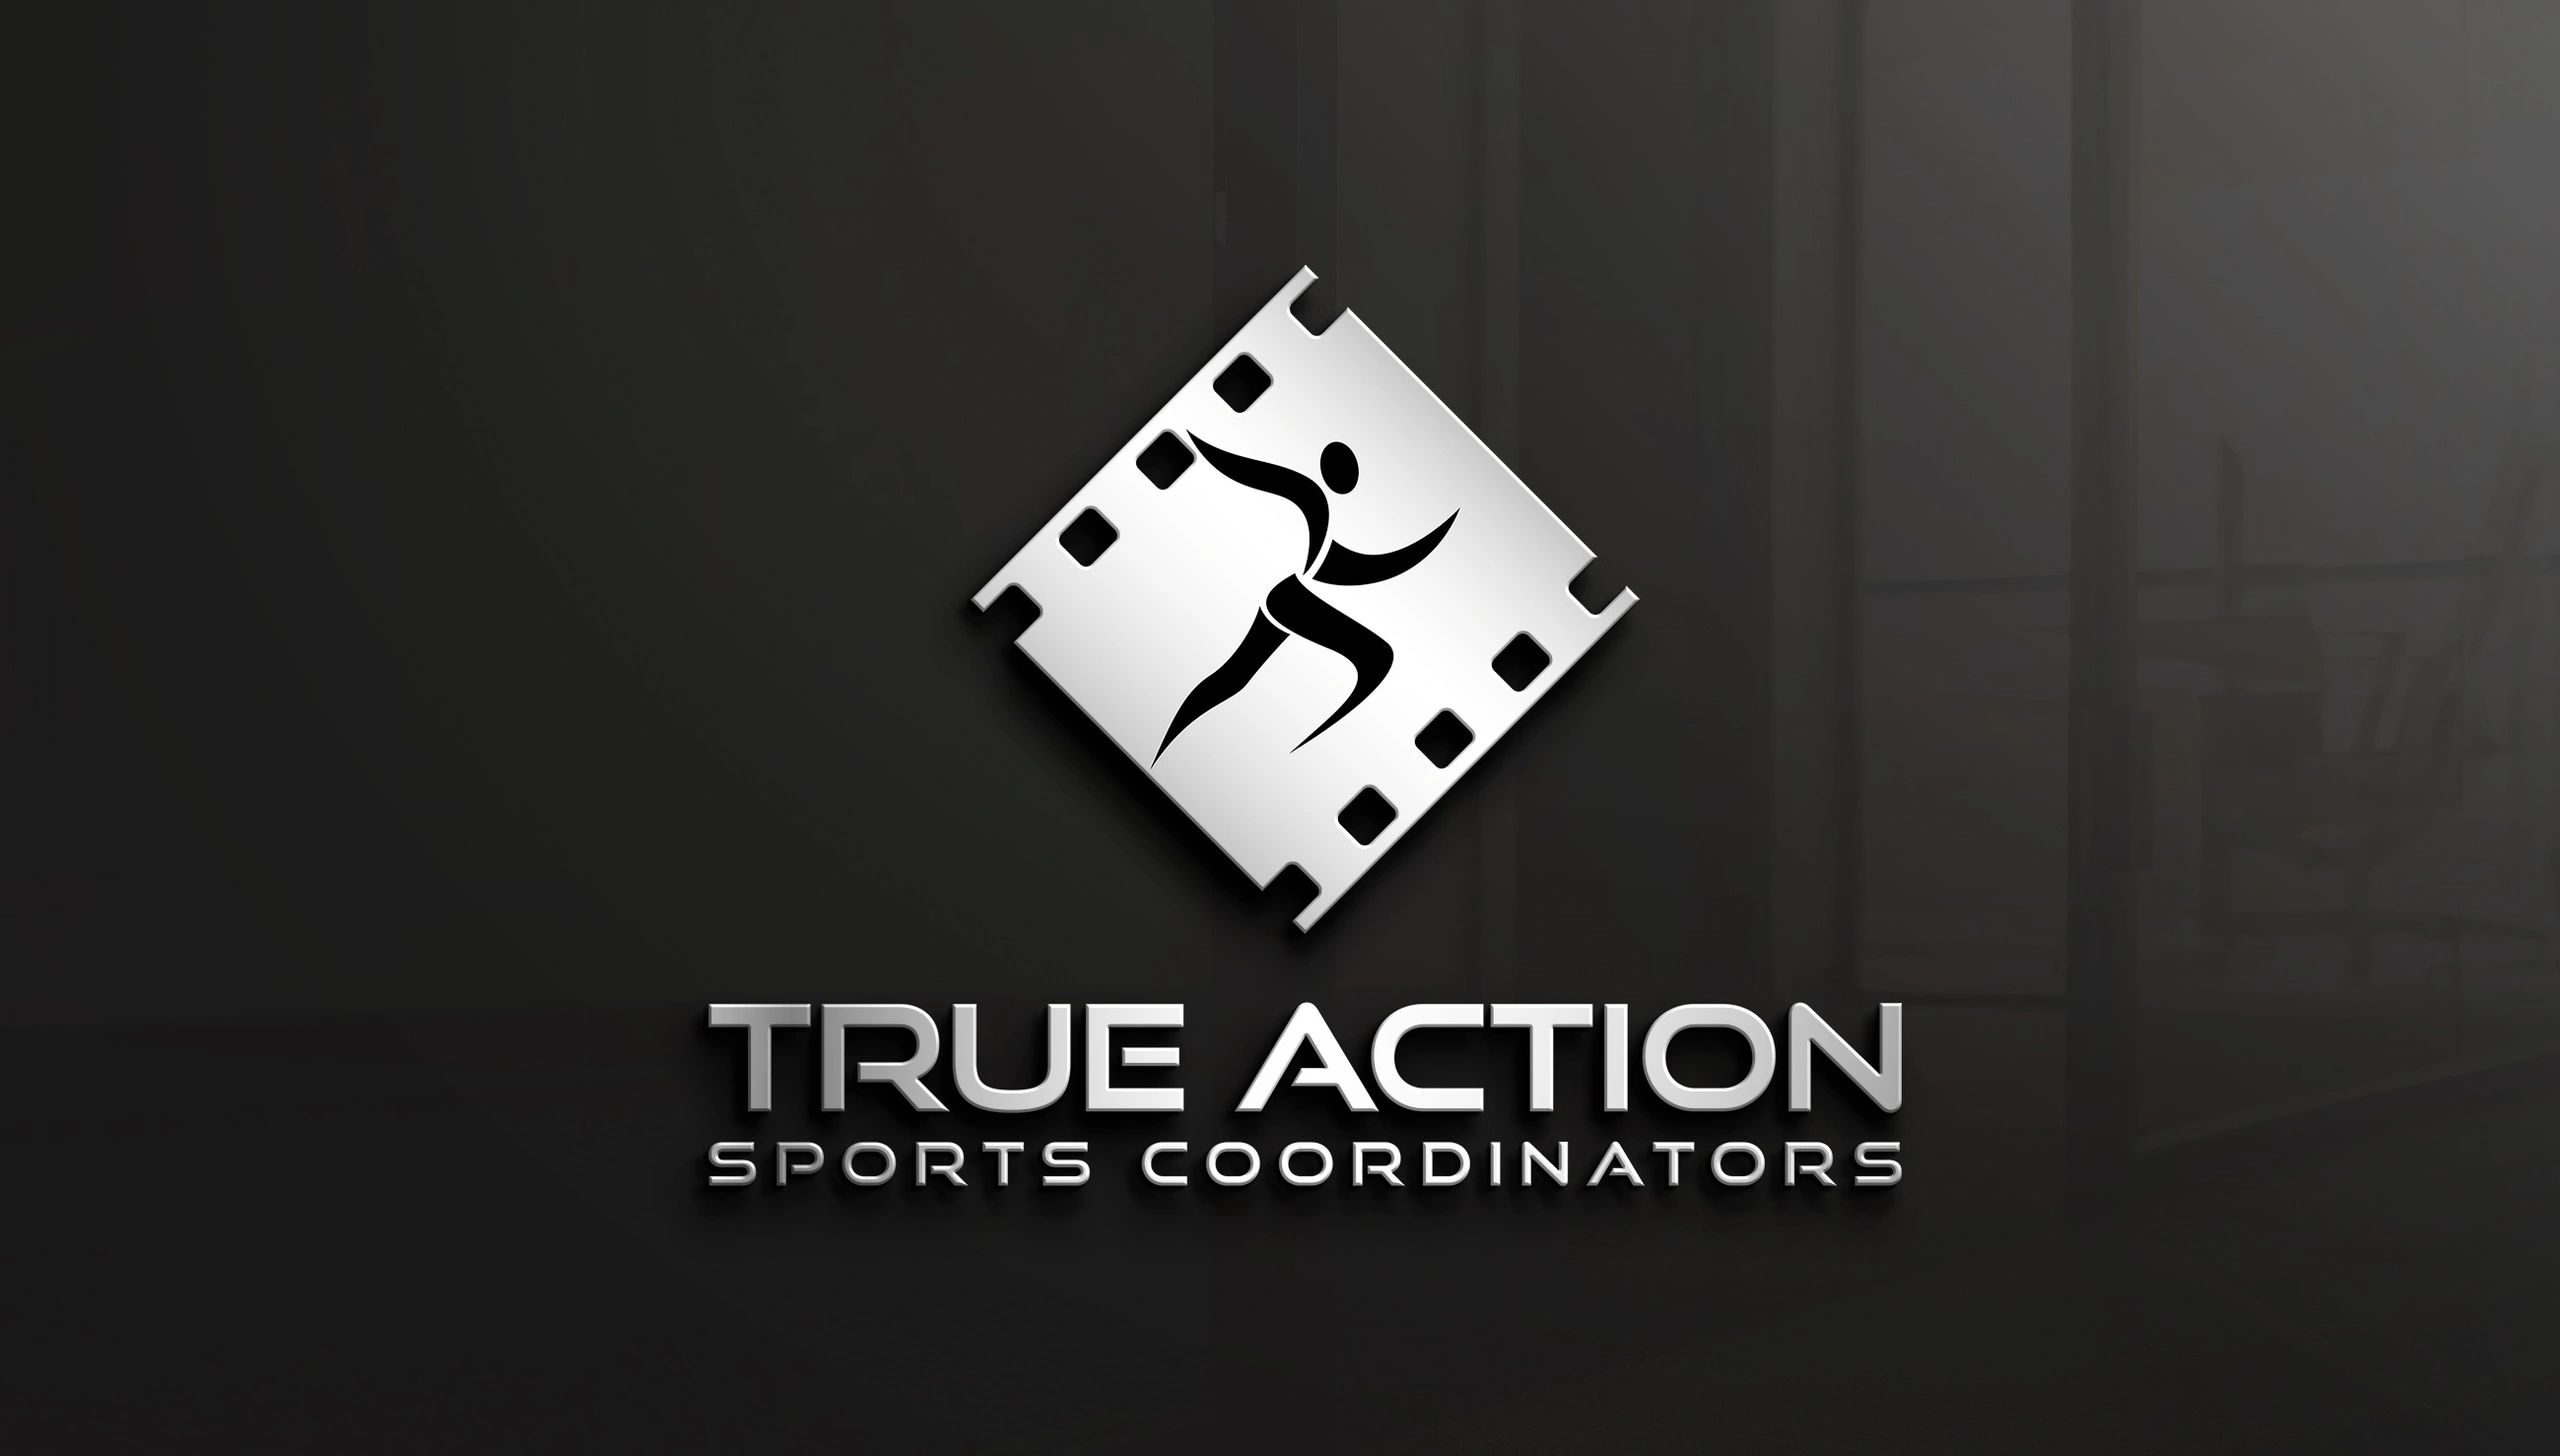 True action sports coordinators.  sports coordinating and consulting for film and television.